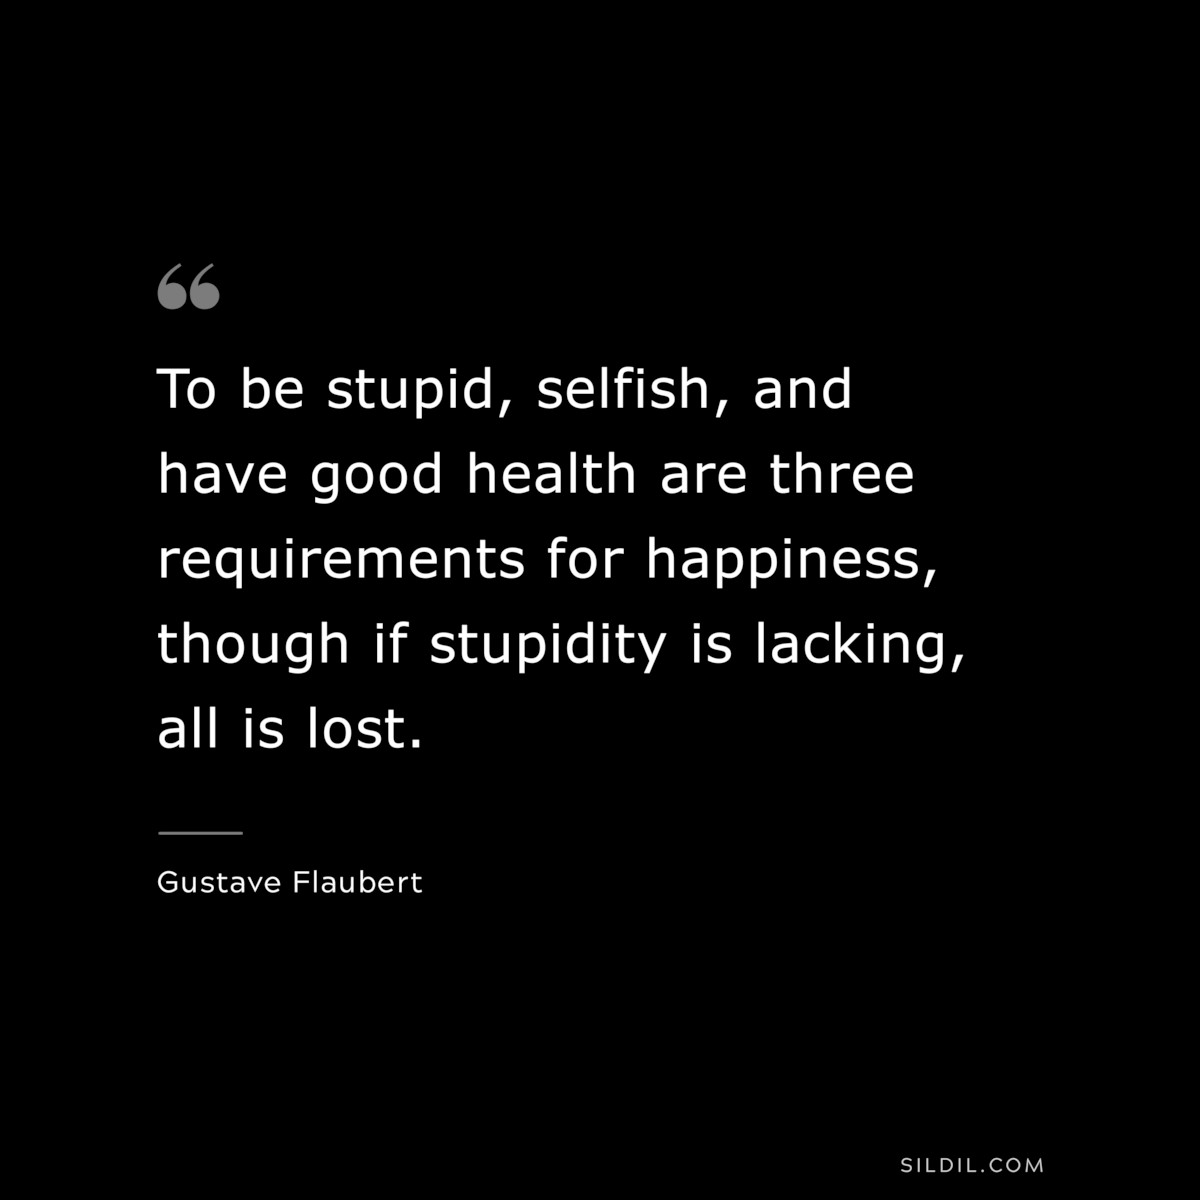 To be stupid, selfish, and have good health are three requirements for happiness, though if stupidity is lacking, all is lost. ― Gustave Flaubert